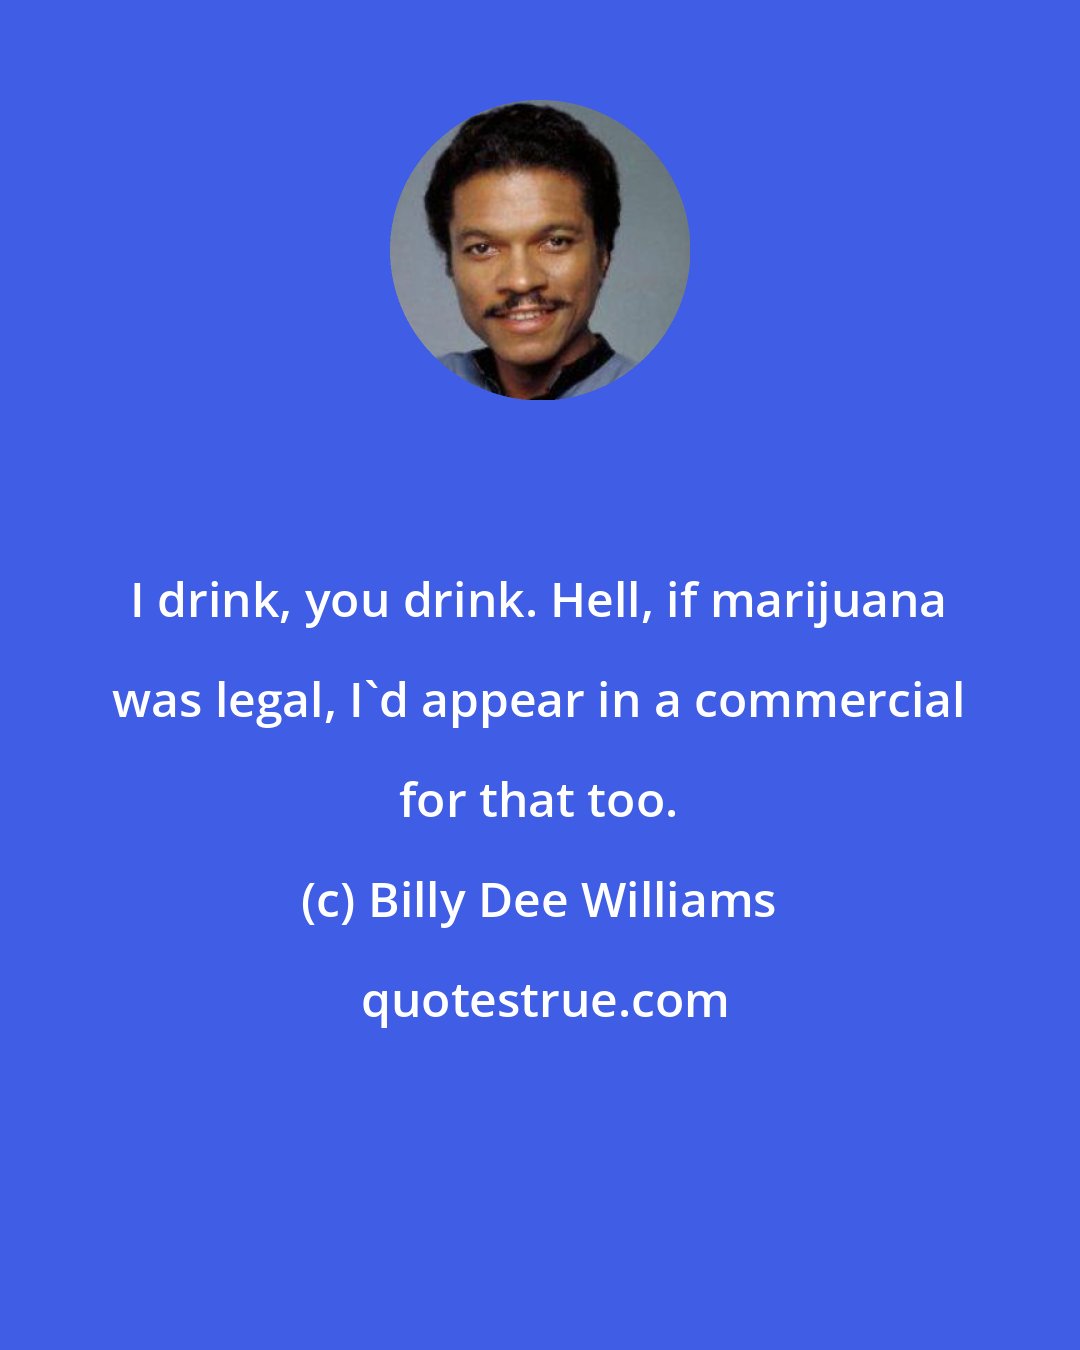 Billy Dee Williams: I drink, you drink. Hell, if marijuana was legal, I'd appear in a commercial for that too.